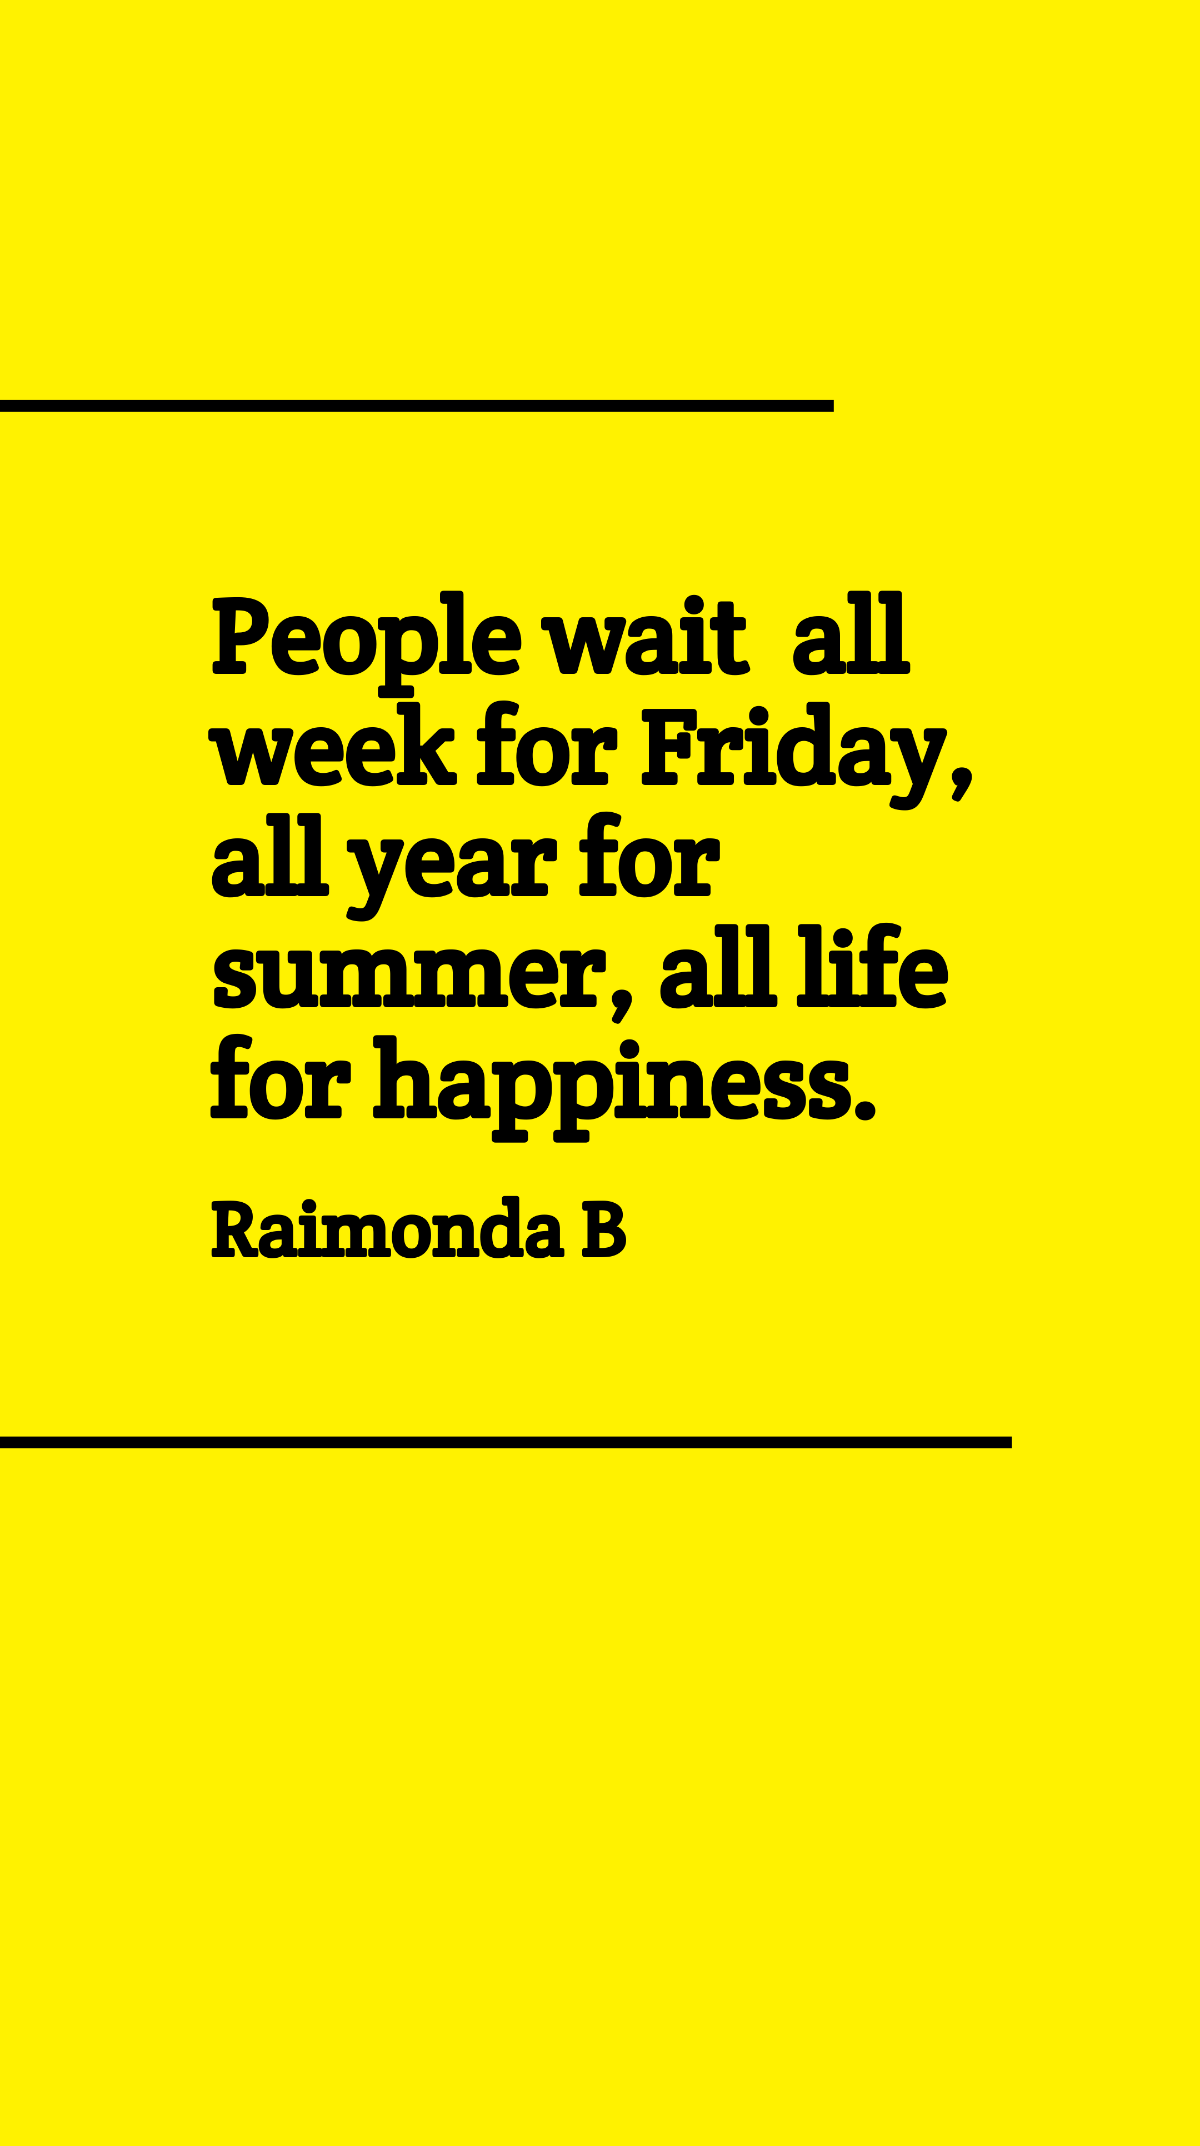 Raimonda B - People wait all week for Friday, all year for summer, all life for happiness. Template